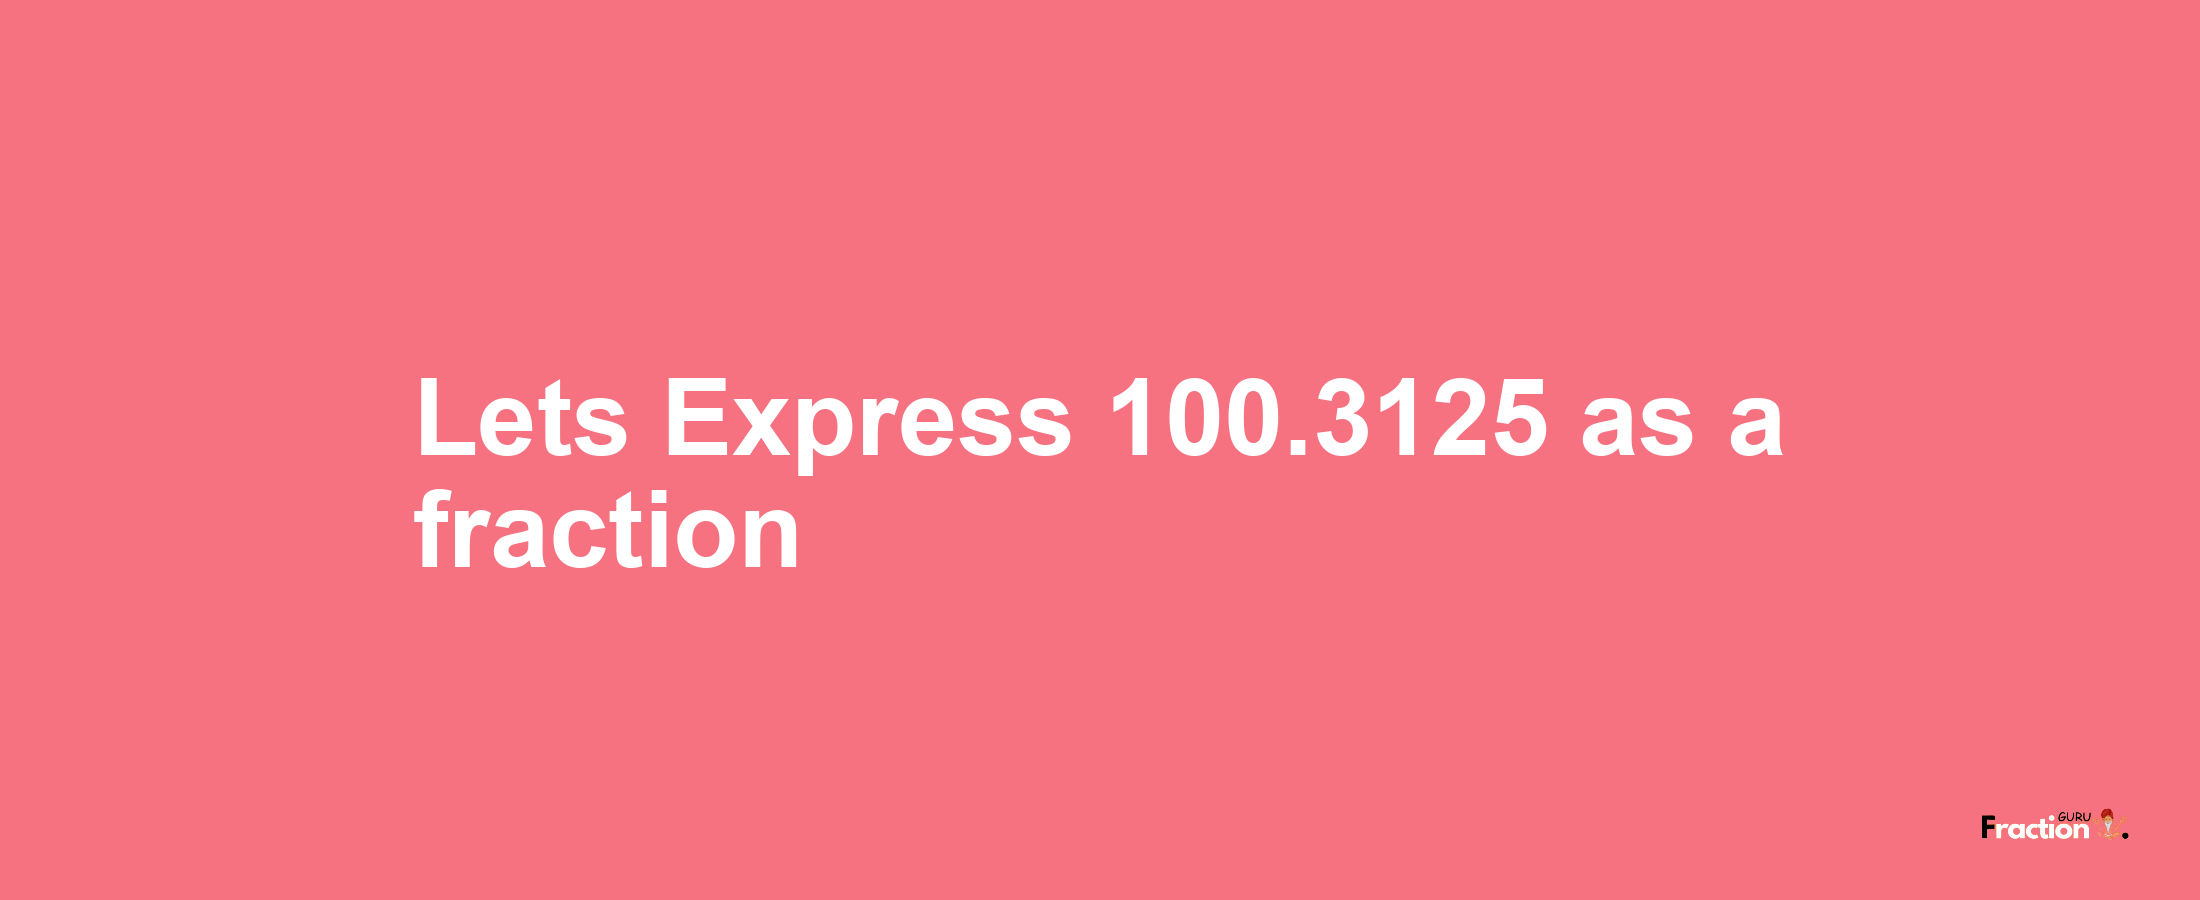 Lets Express 100.3125 as afraction